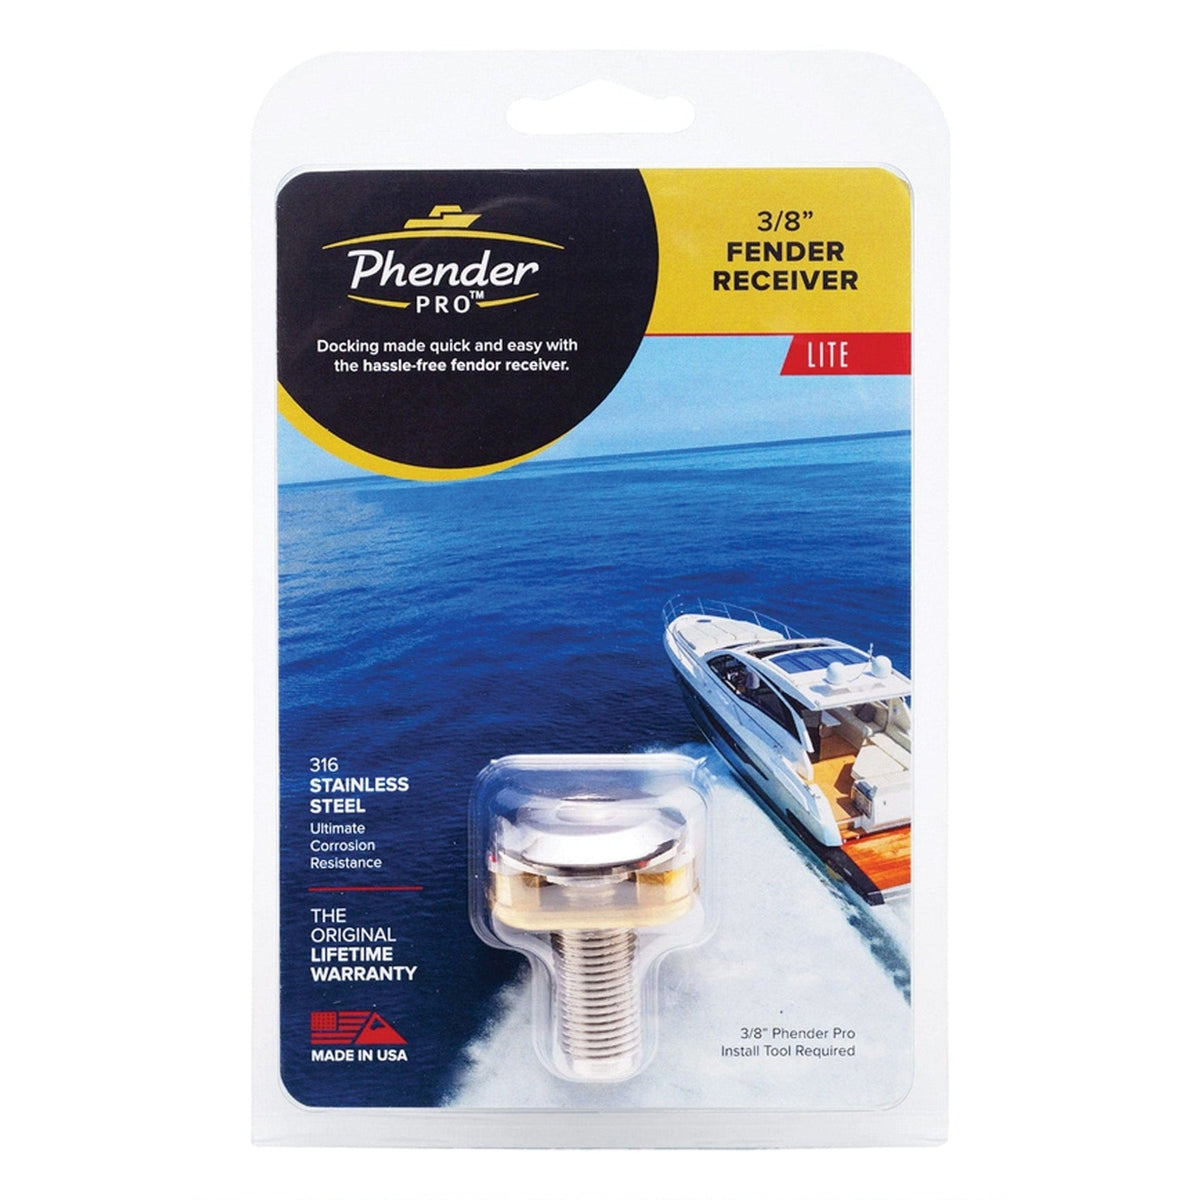 Phender Pro Qualifies for Free Shipping Phender Pro Quick Release Fender Receiver 3/8" #BSPA-1185